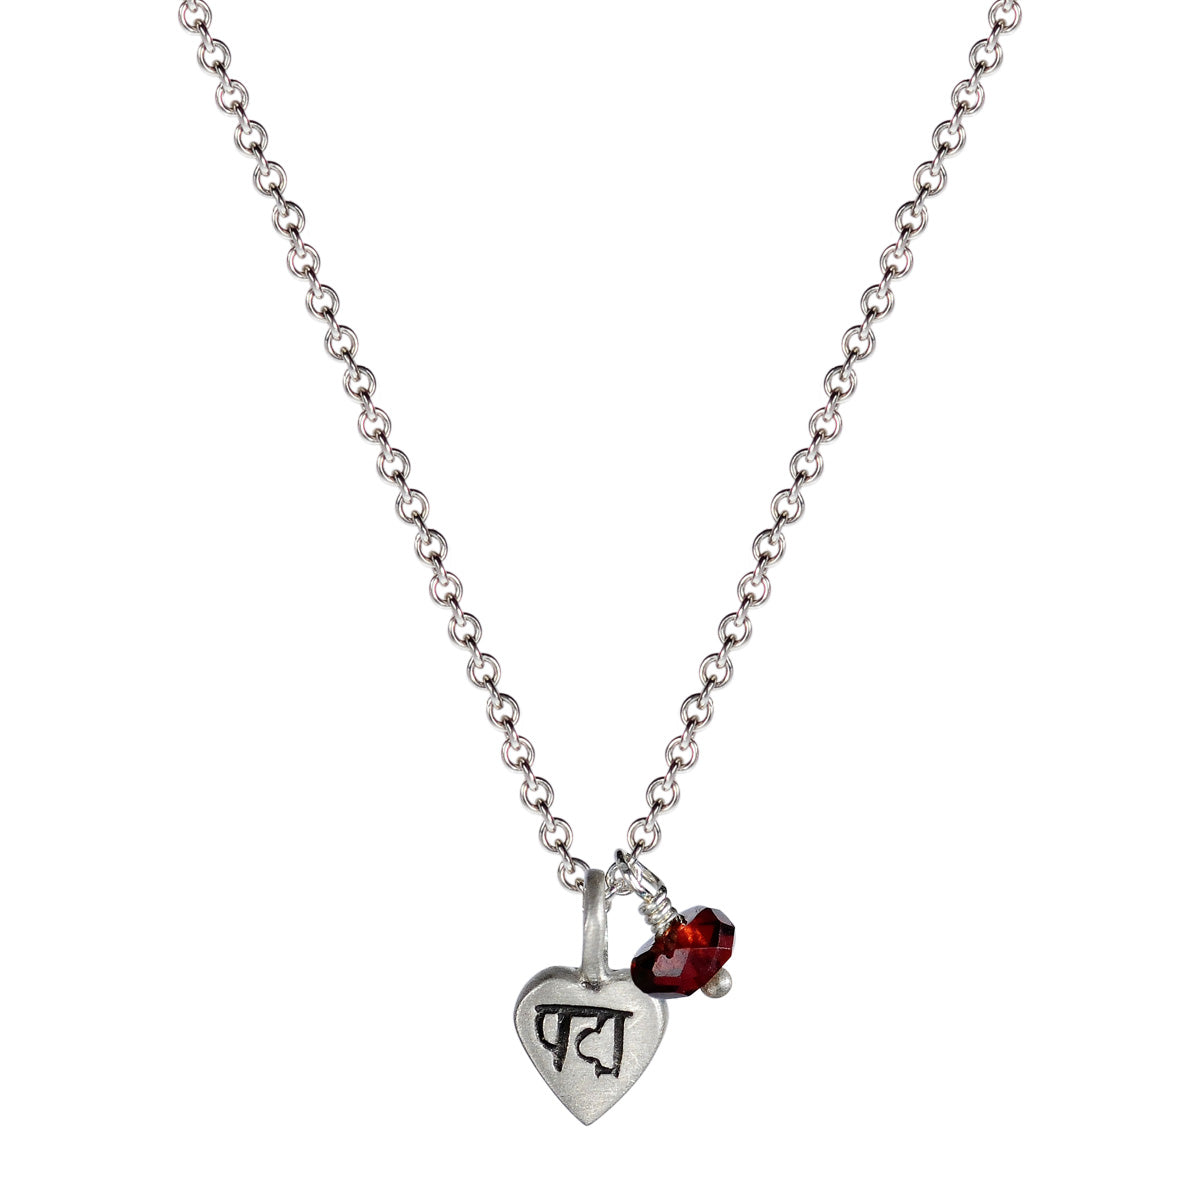 Sterling Silver Tiny Lotus Heart Pendant with Garnet Bead